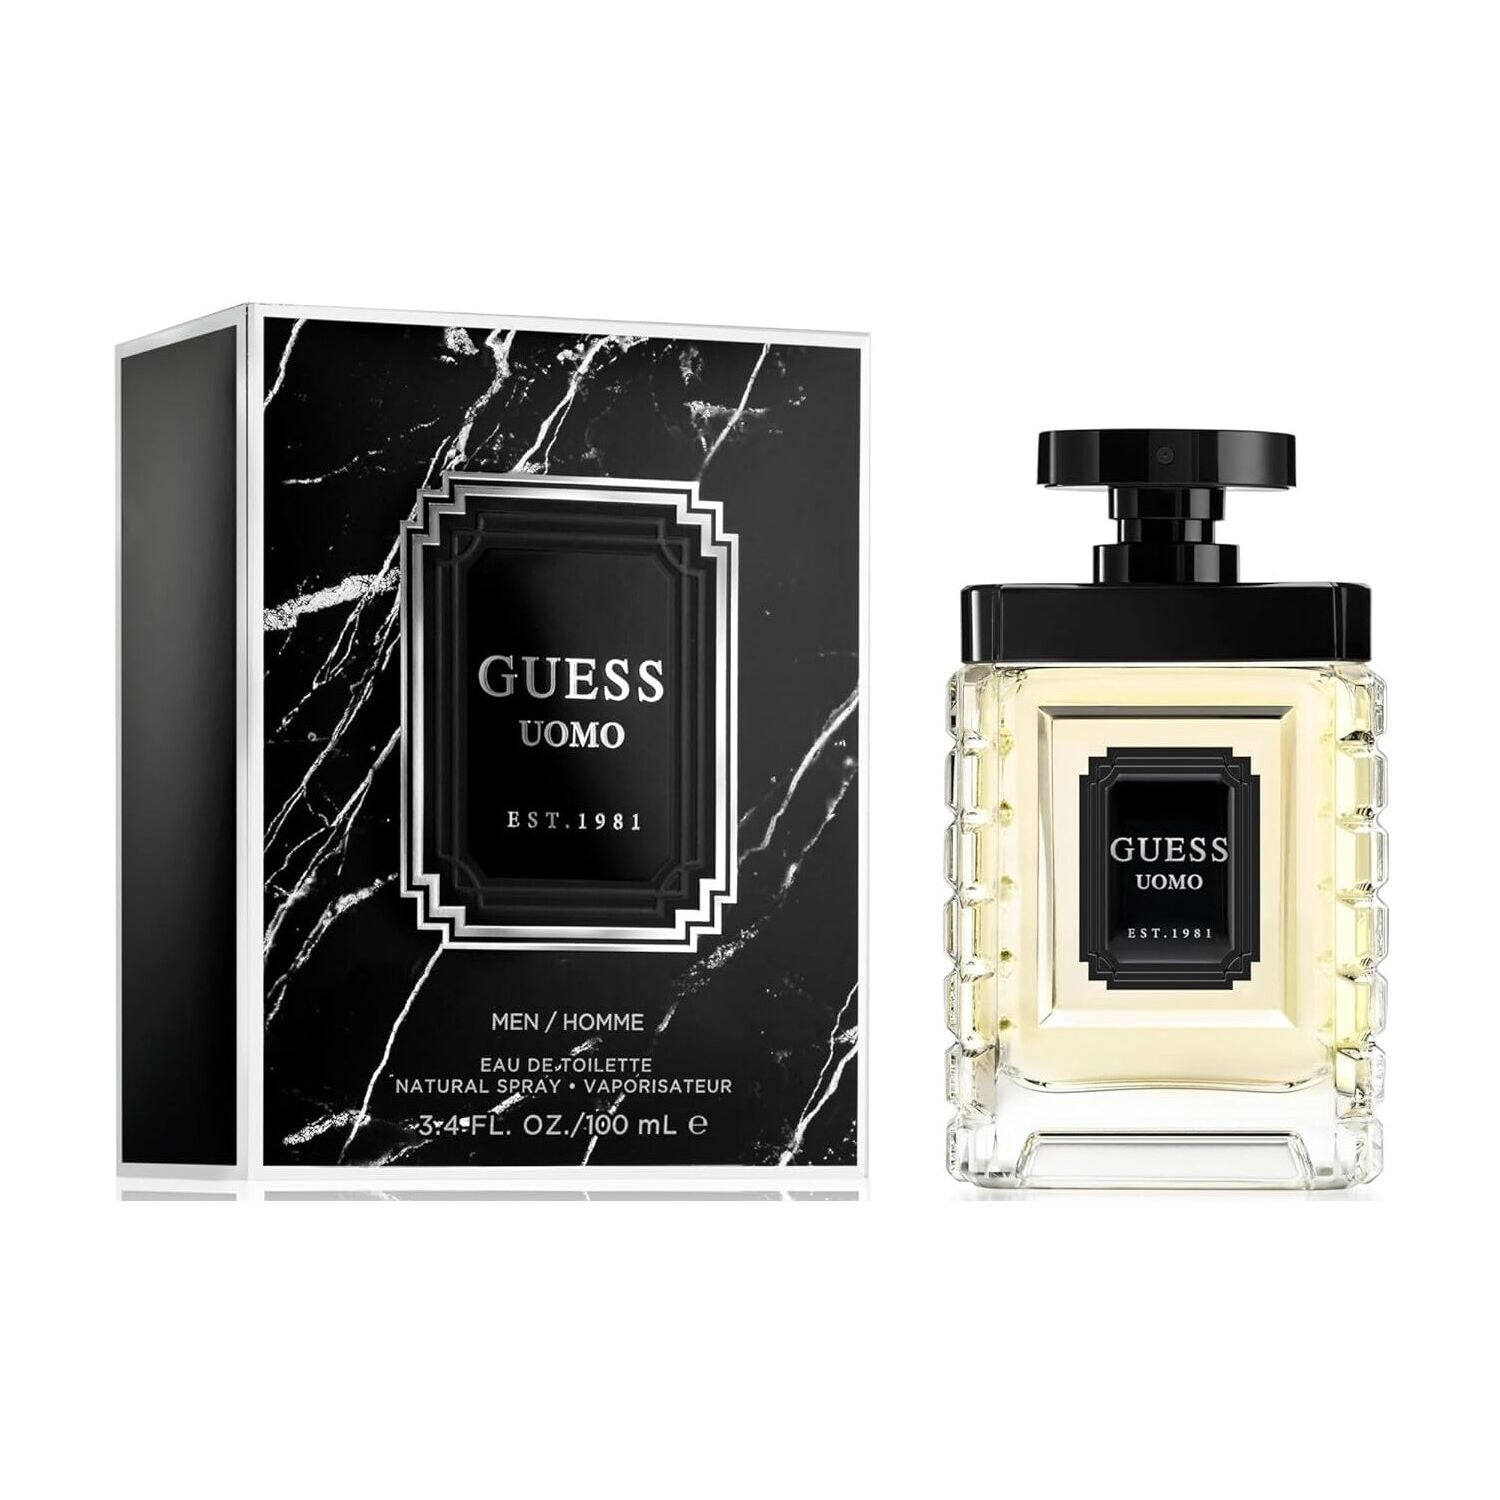 Guess Uomo by Guess 3.4 oz EDT Spray for Men